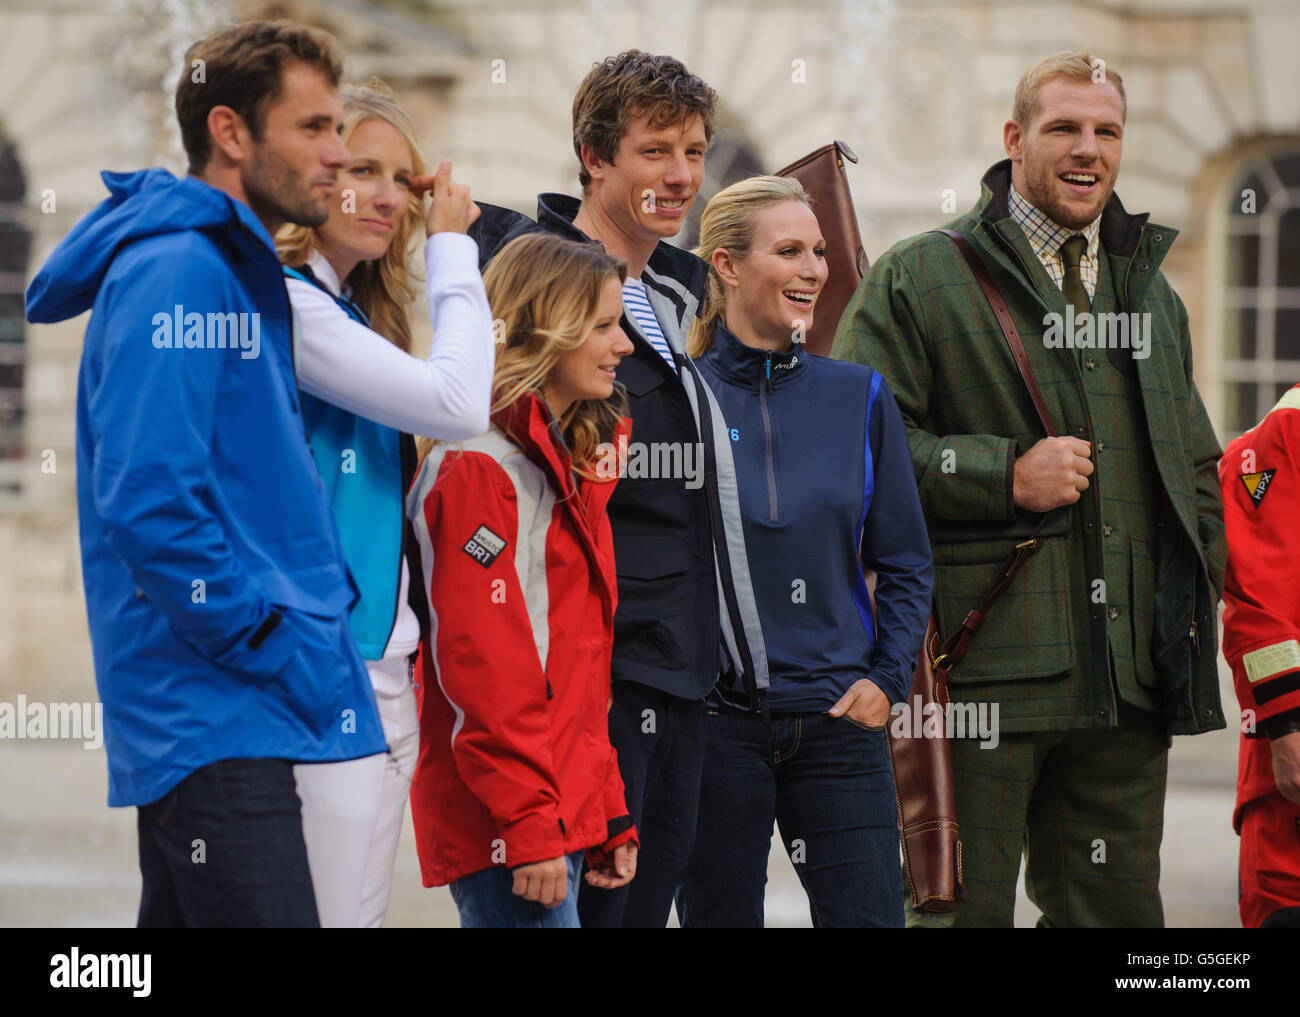 Zara Phillips (second from right) with(left to right) Nick Dempsey, Saskia  Clark, Hannah Mills, Stuart Bithell and James Haskell, during a photocall  for the Musto Spring/Summer 2013 collection, at Somerset House, central